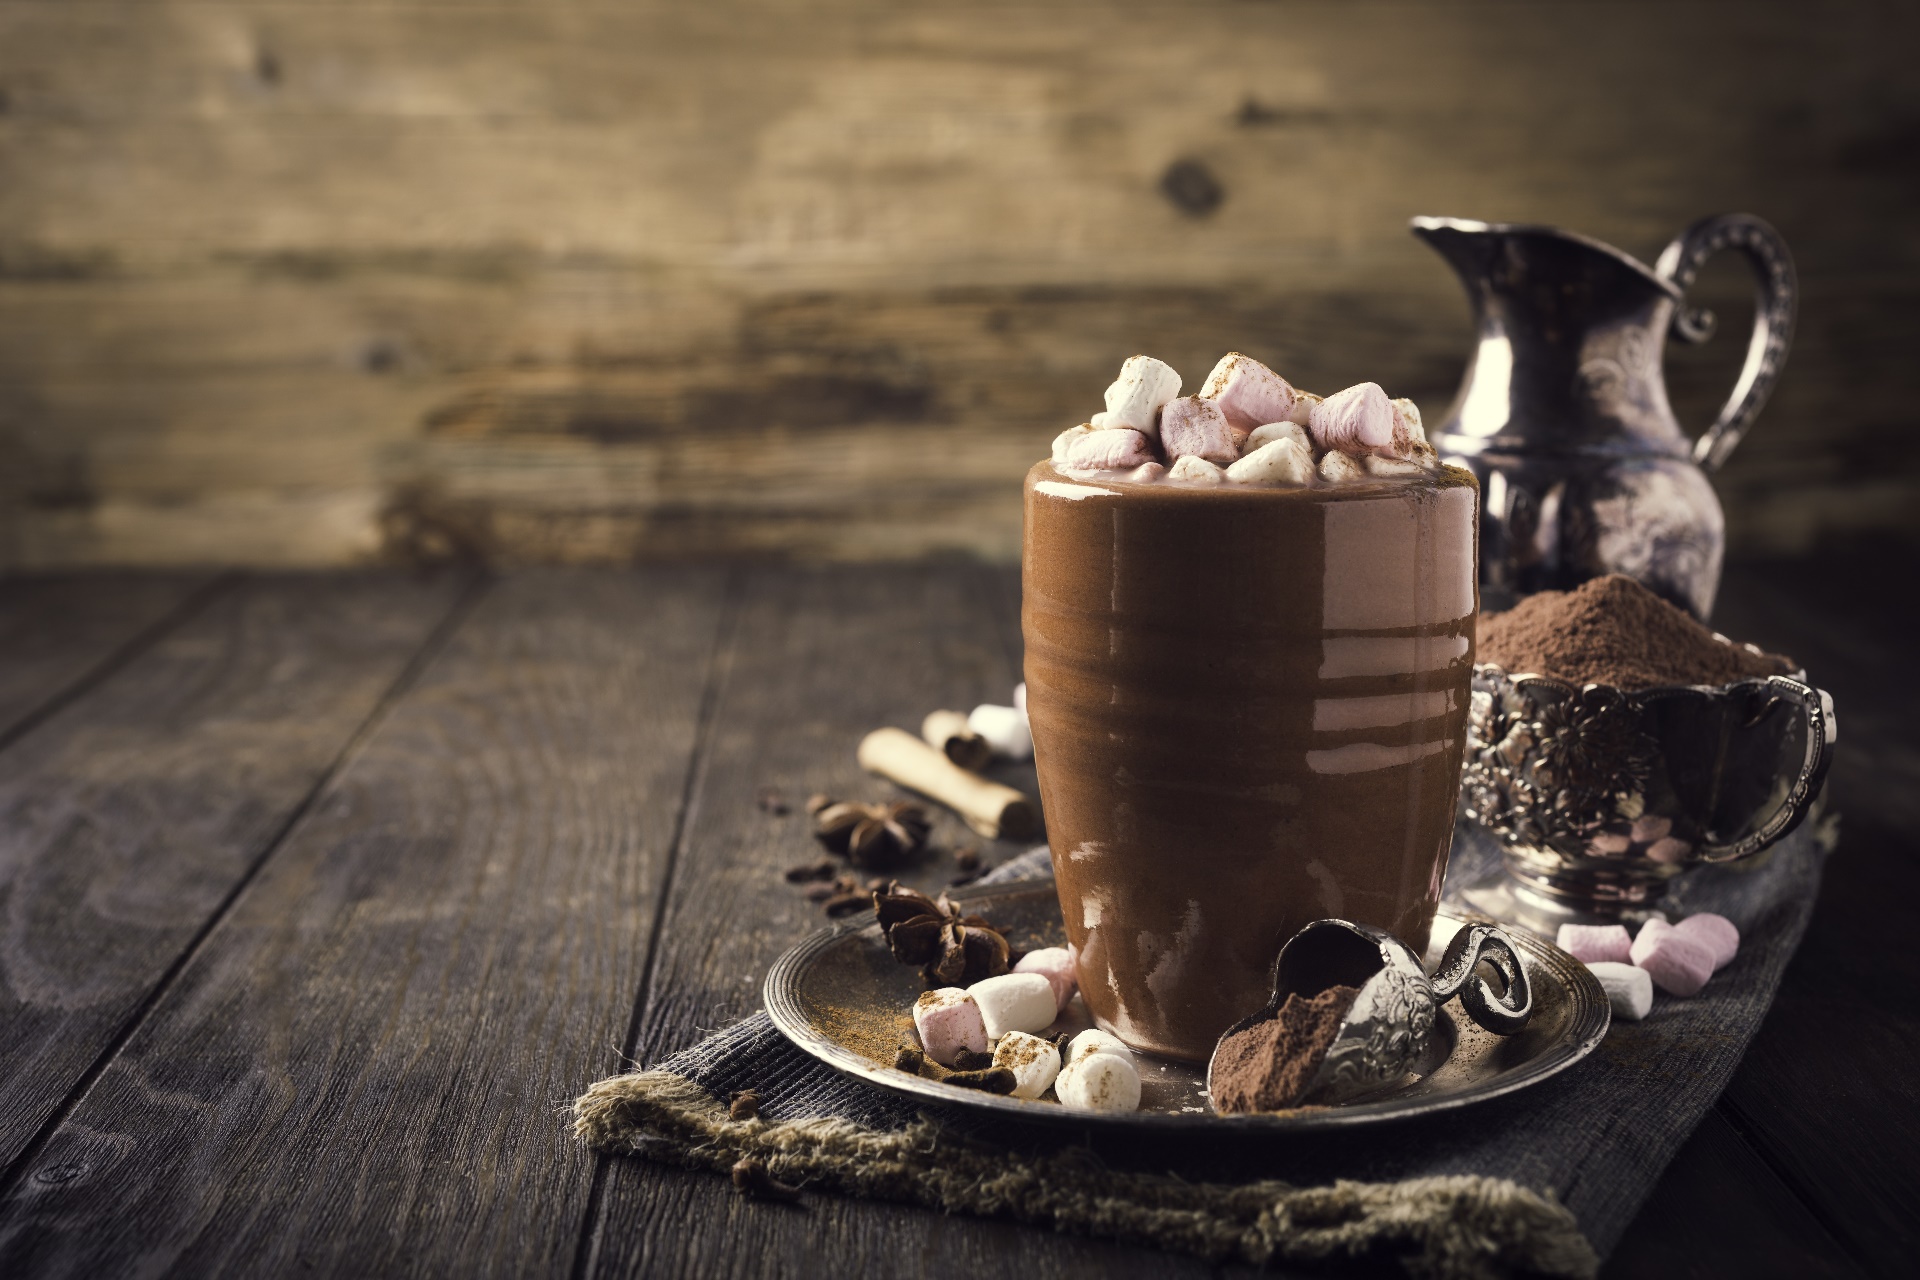 General 1920x1280 food sweets cup still life Hot Cocoa marshmallows wooden surface chocolate